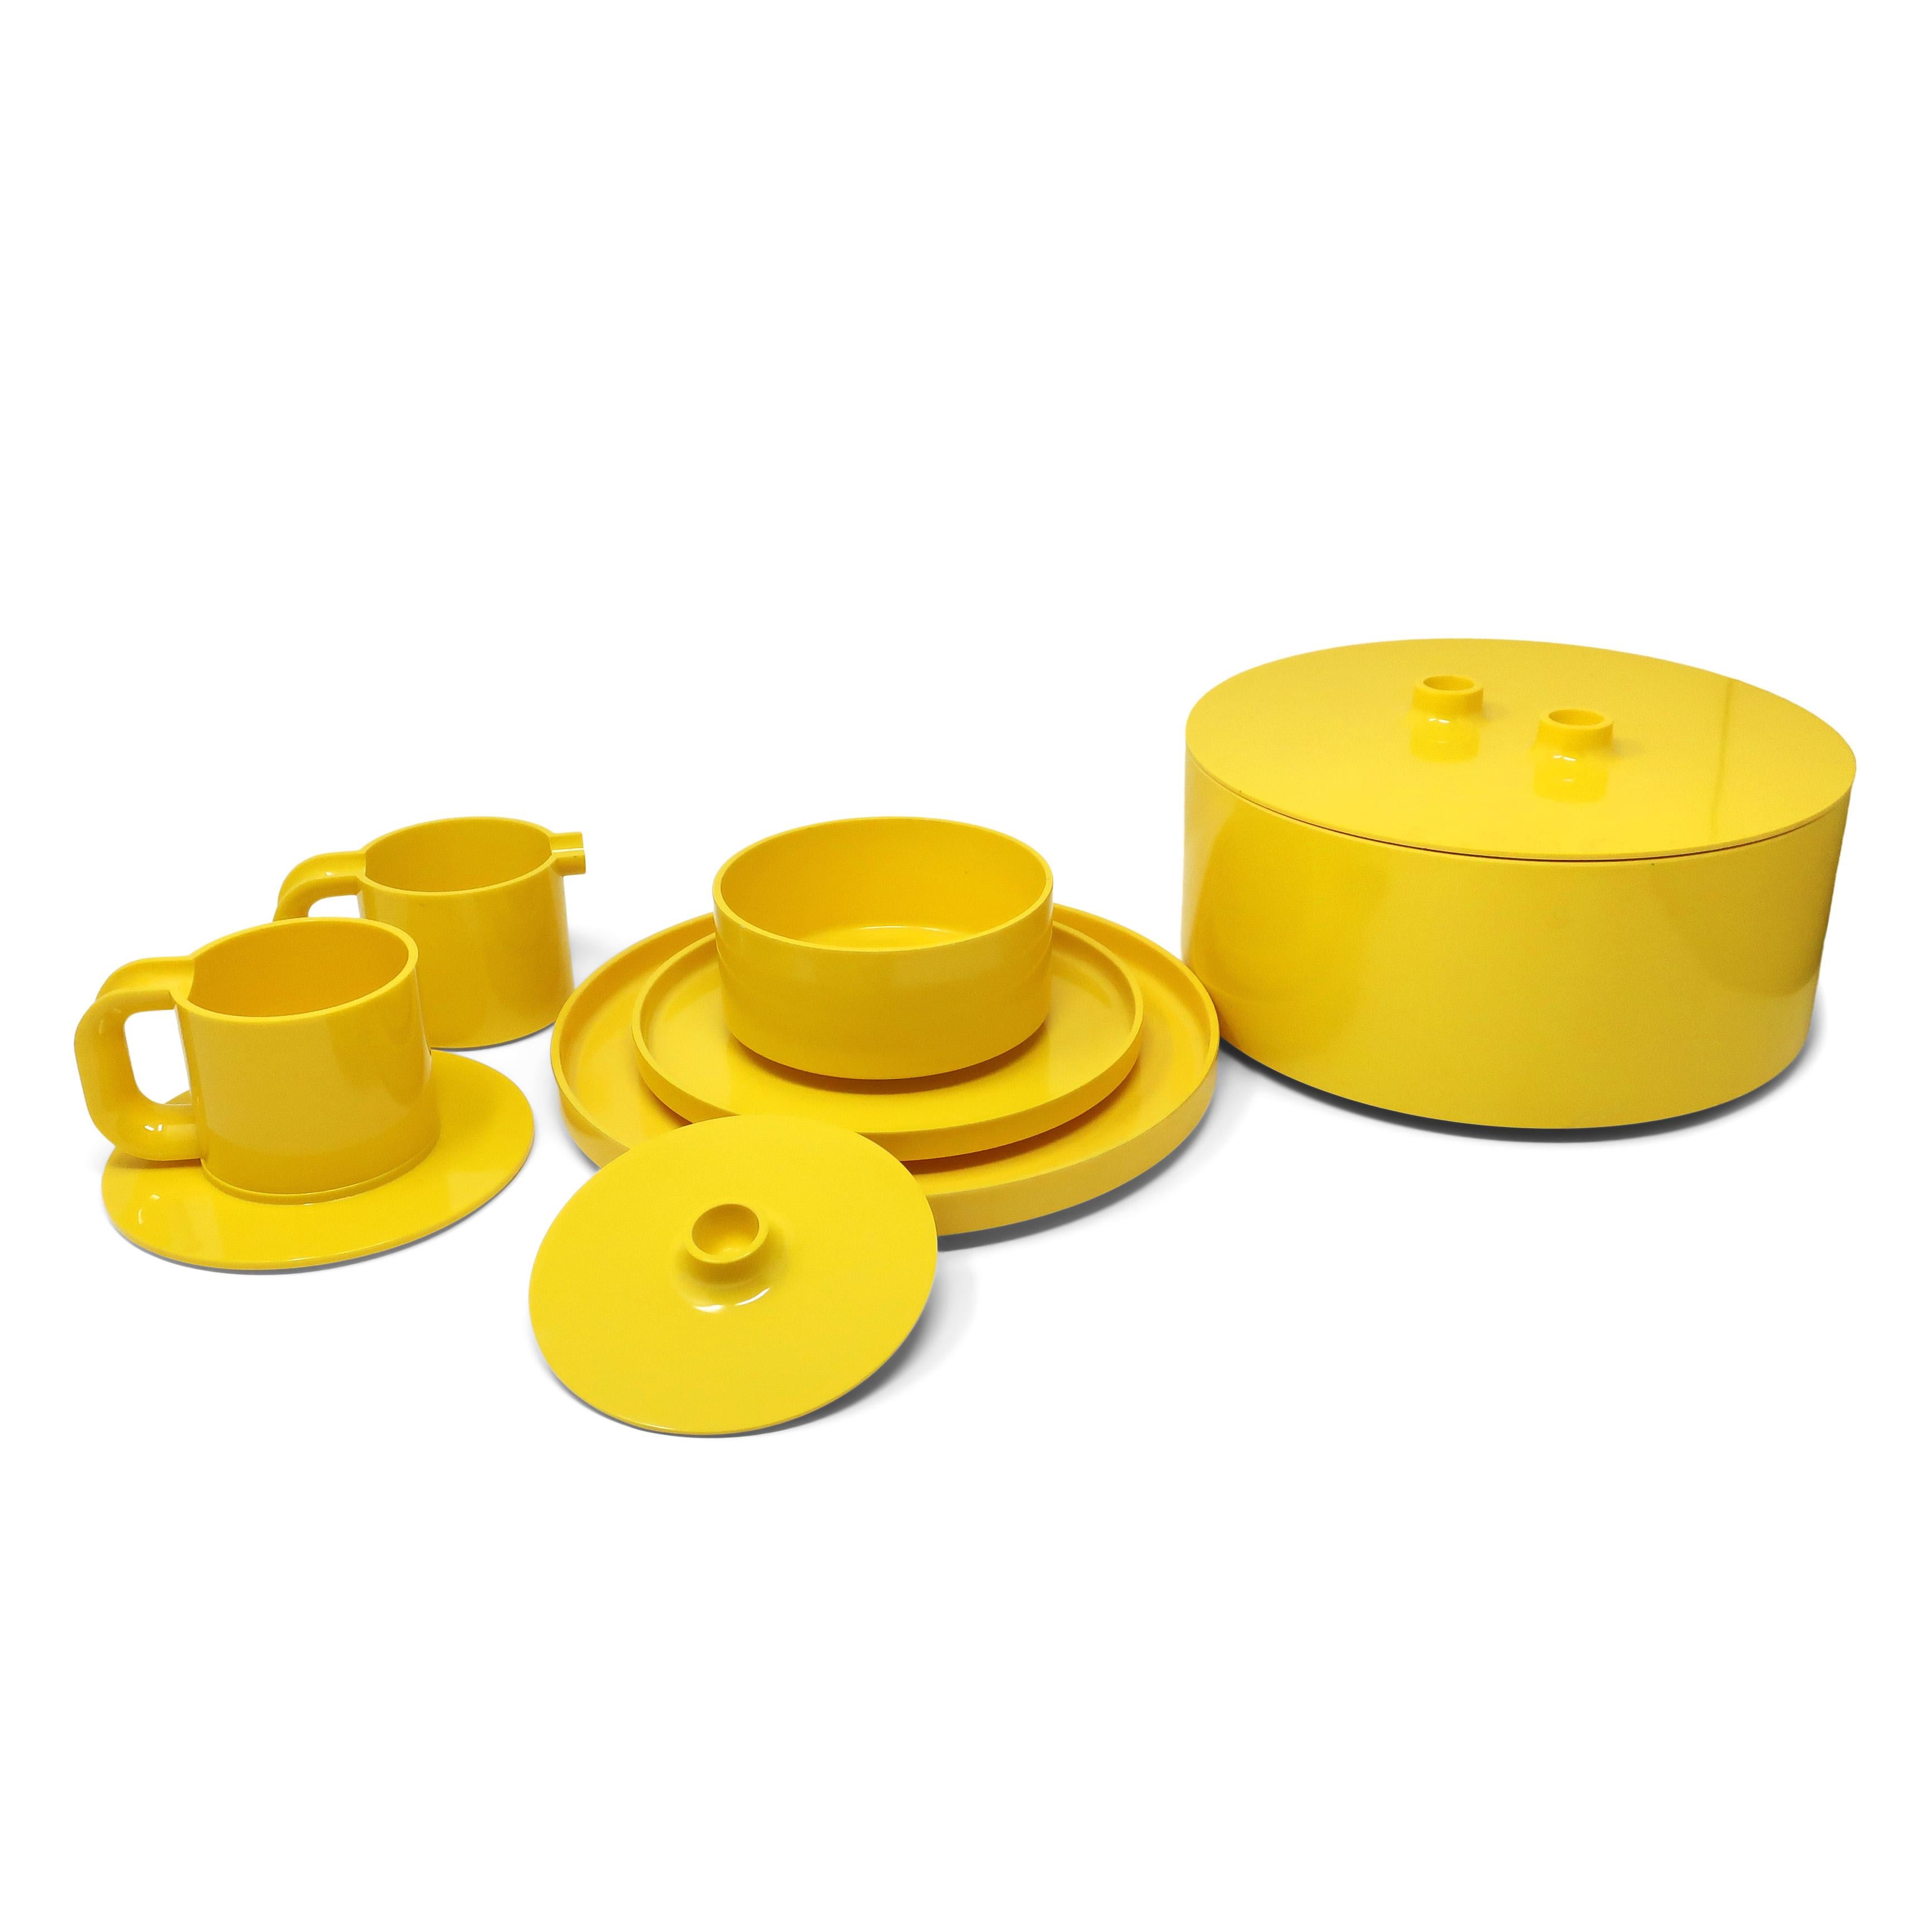 Yellow Dinnerware by Vignelli for Heller, Service for 8 In Good Condition For Sale In Brooklyn, NY